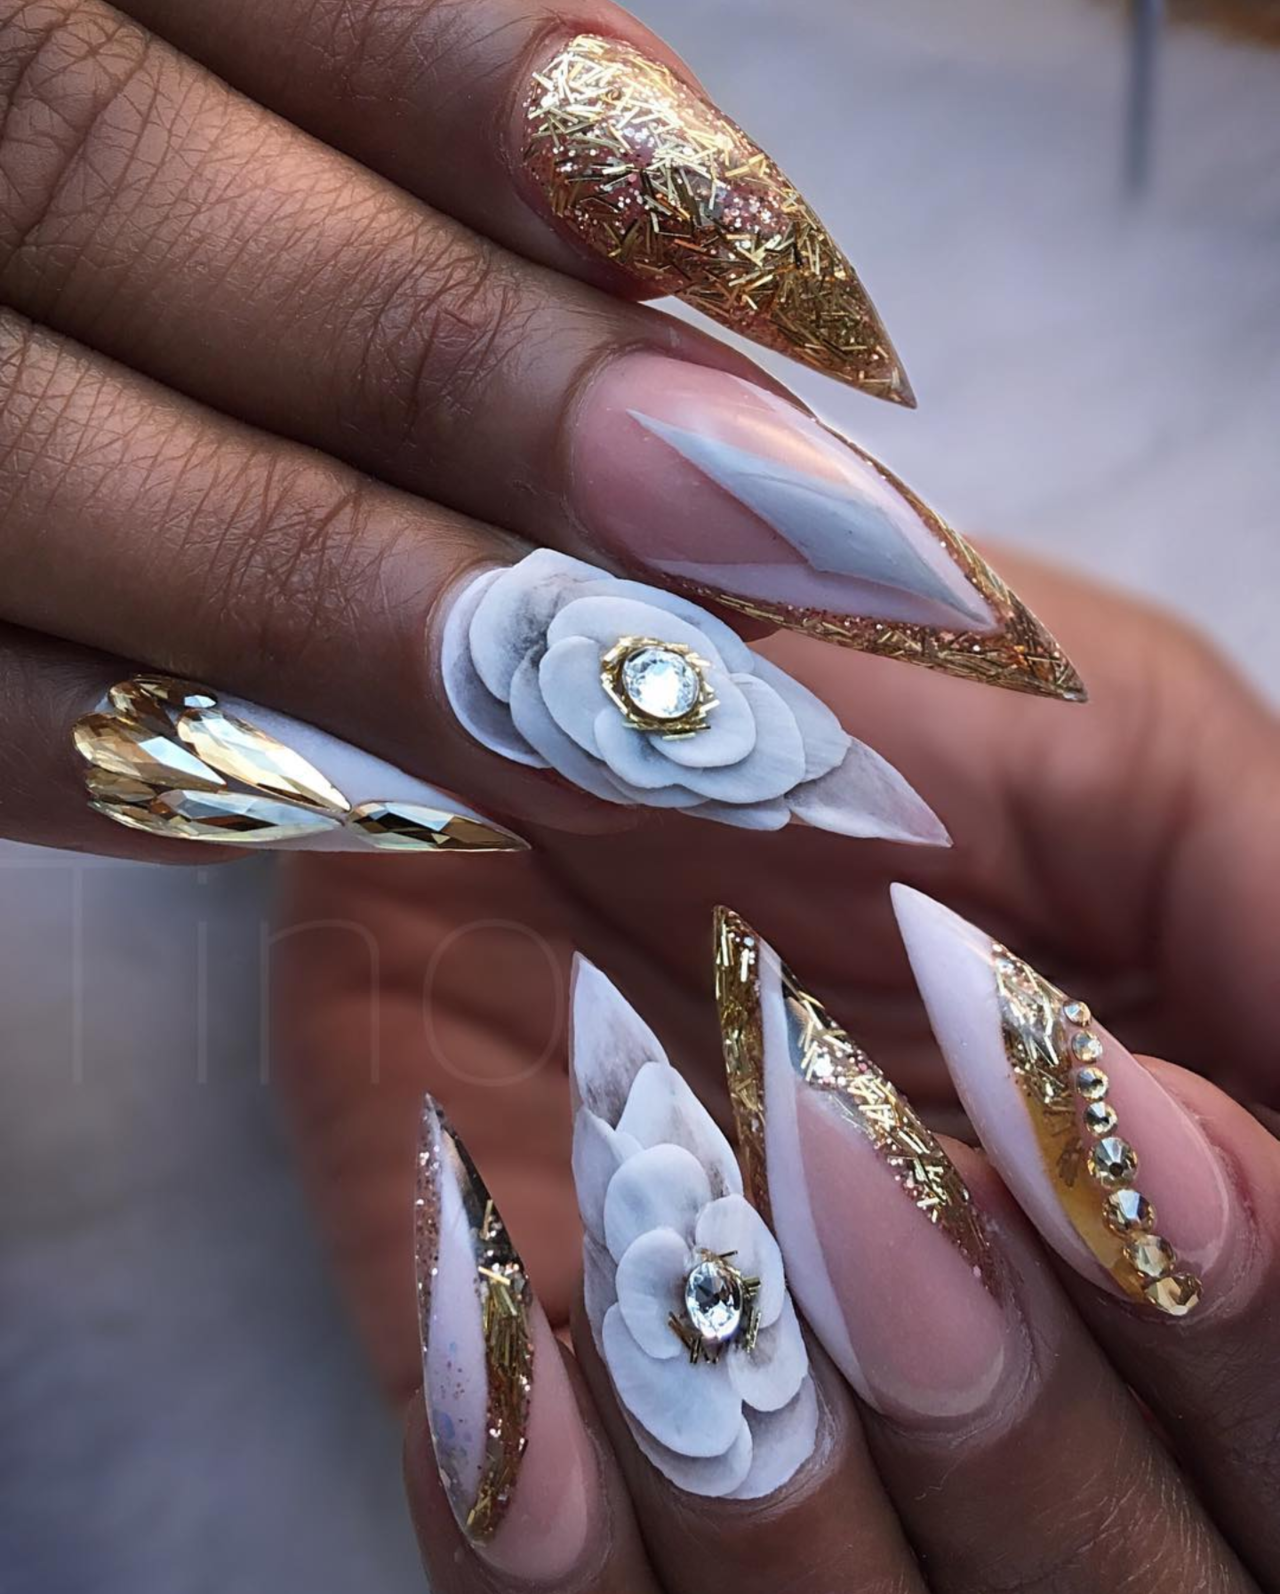 women's white and gold nails